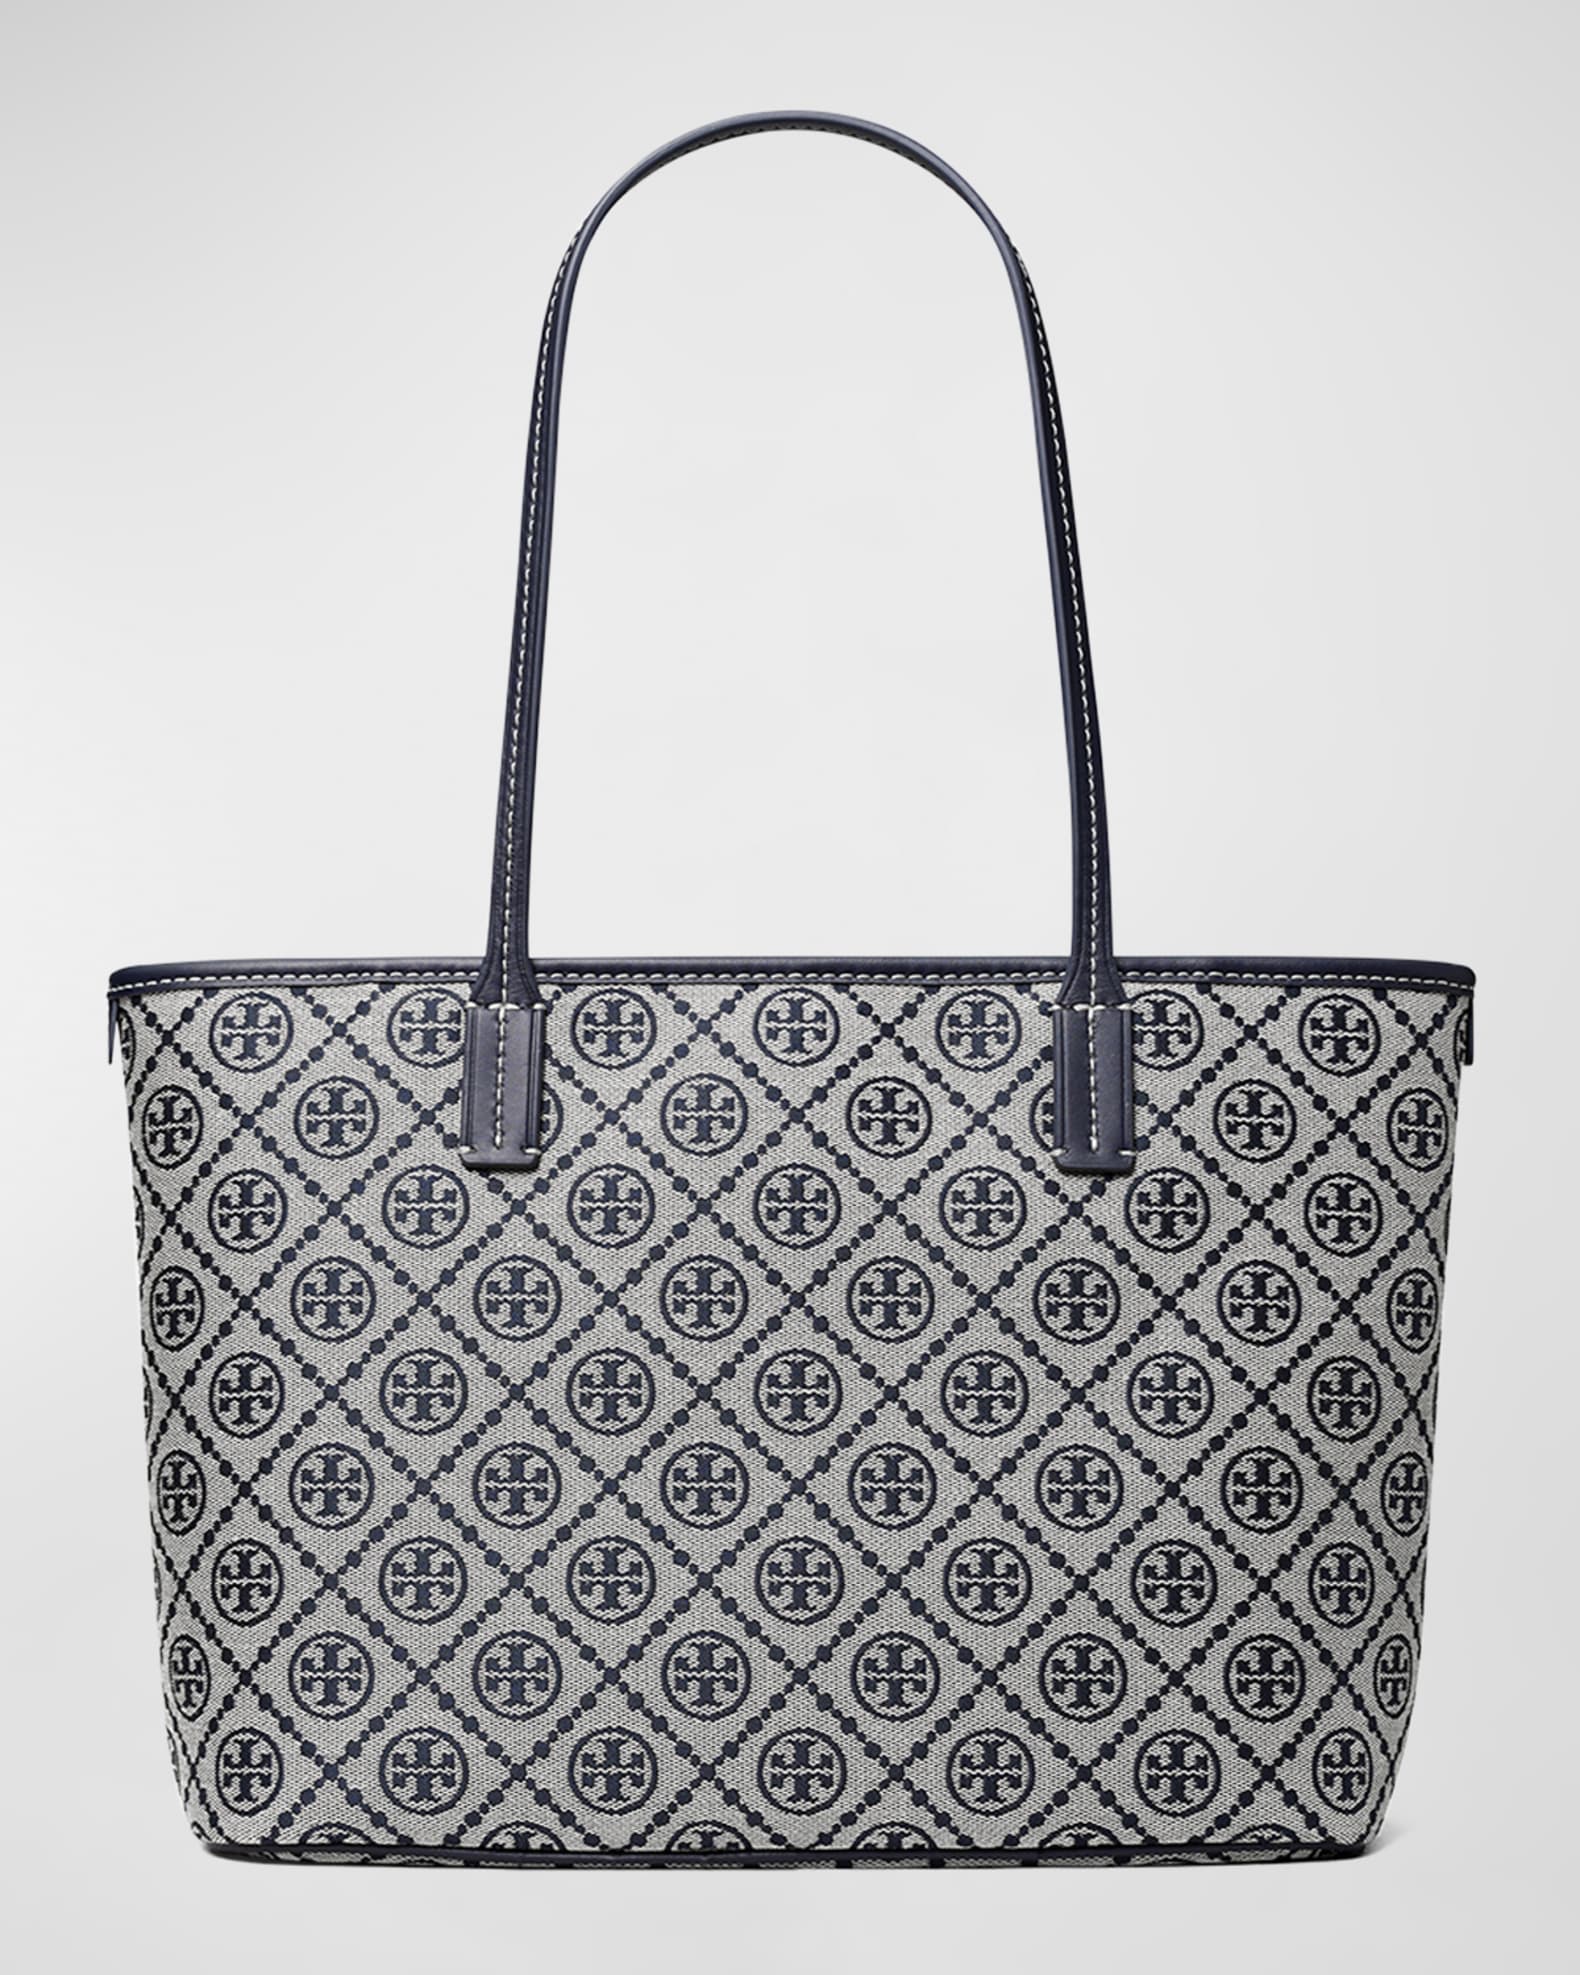 Tory Burch T Monogram Web Strap Coated Canvas Tote Bag